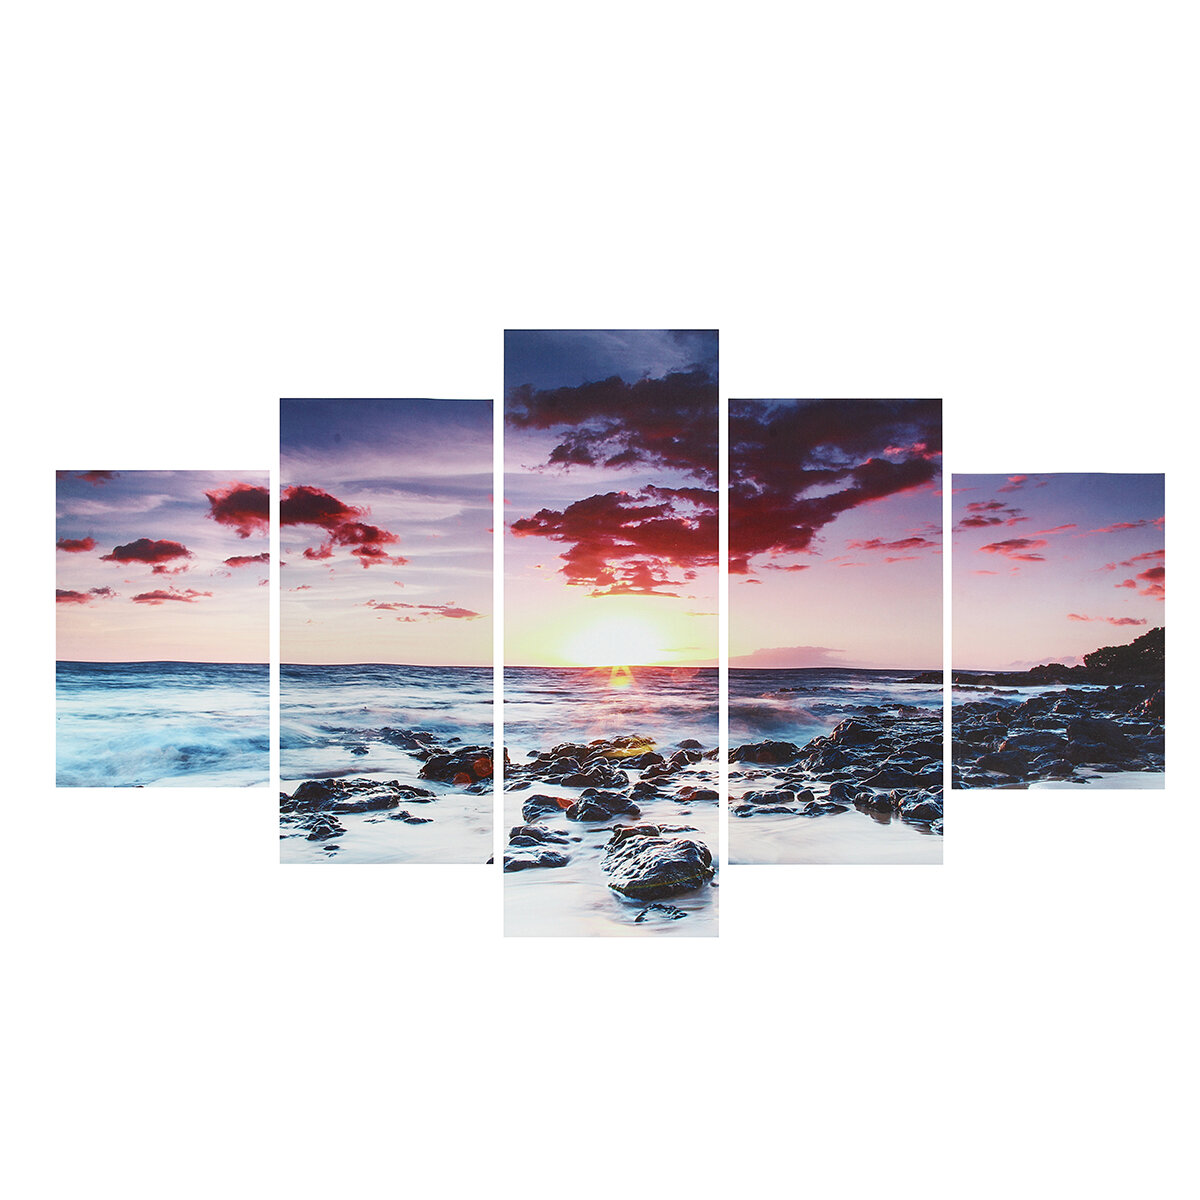 

5 Piece Wall Art Canvas Sunset Sea Wall Art Picture Canvas Painting Home Decor Wall Pictures for Living Room No Framed